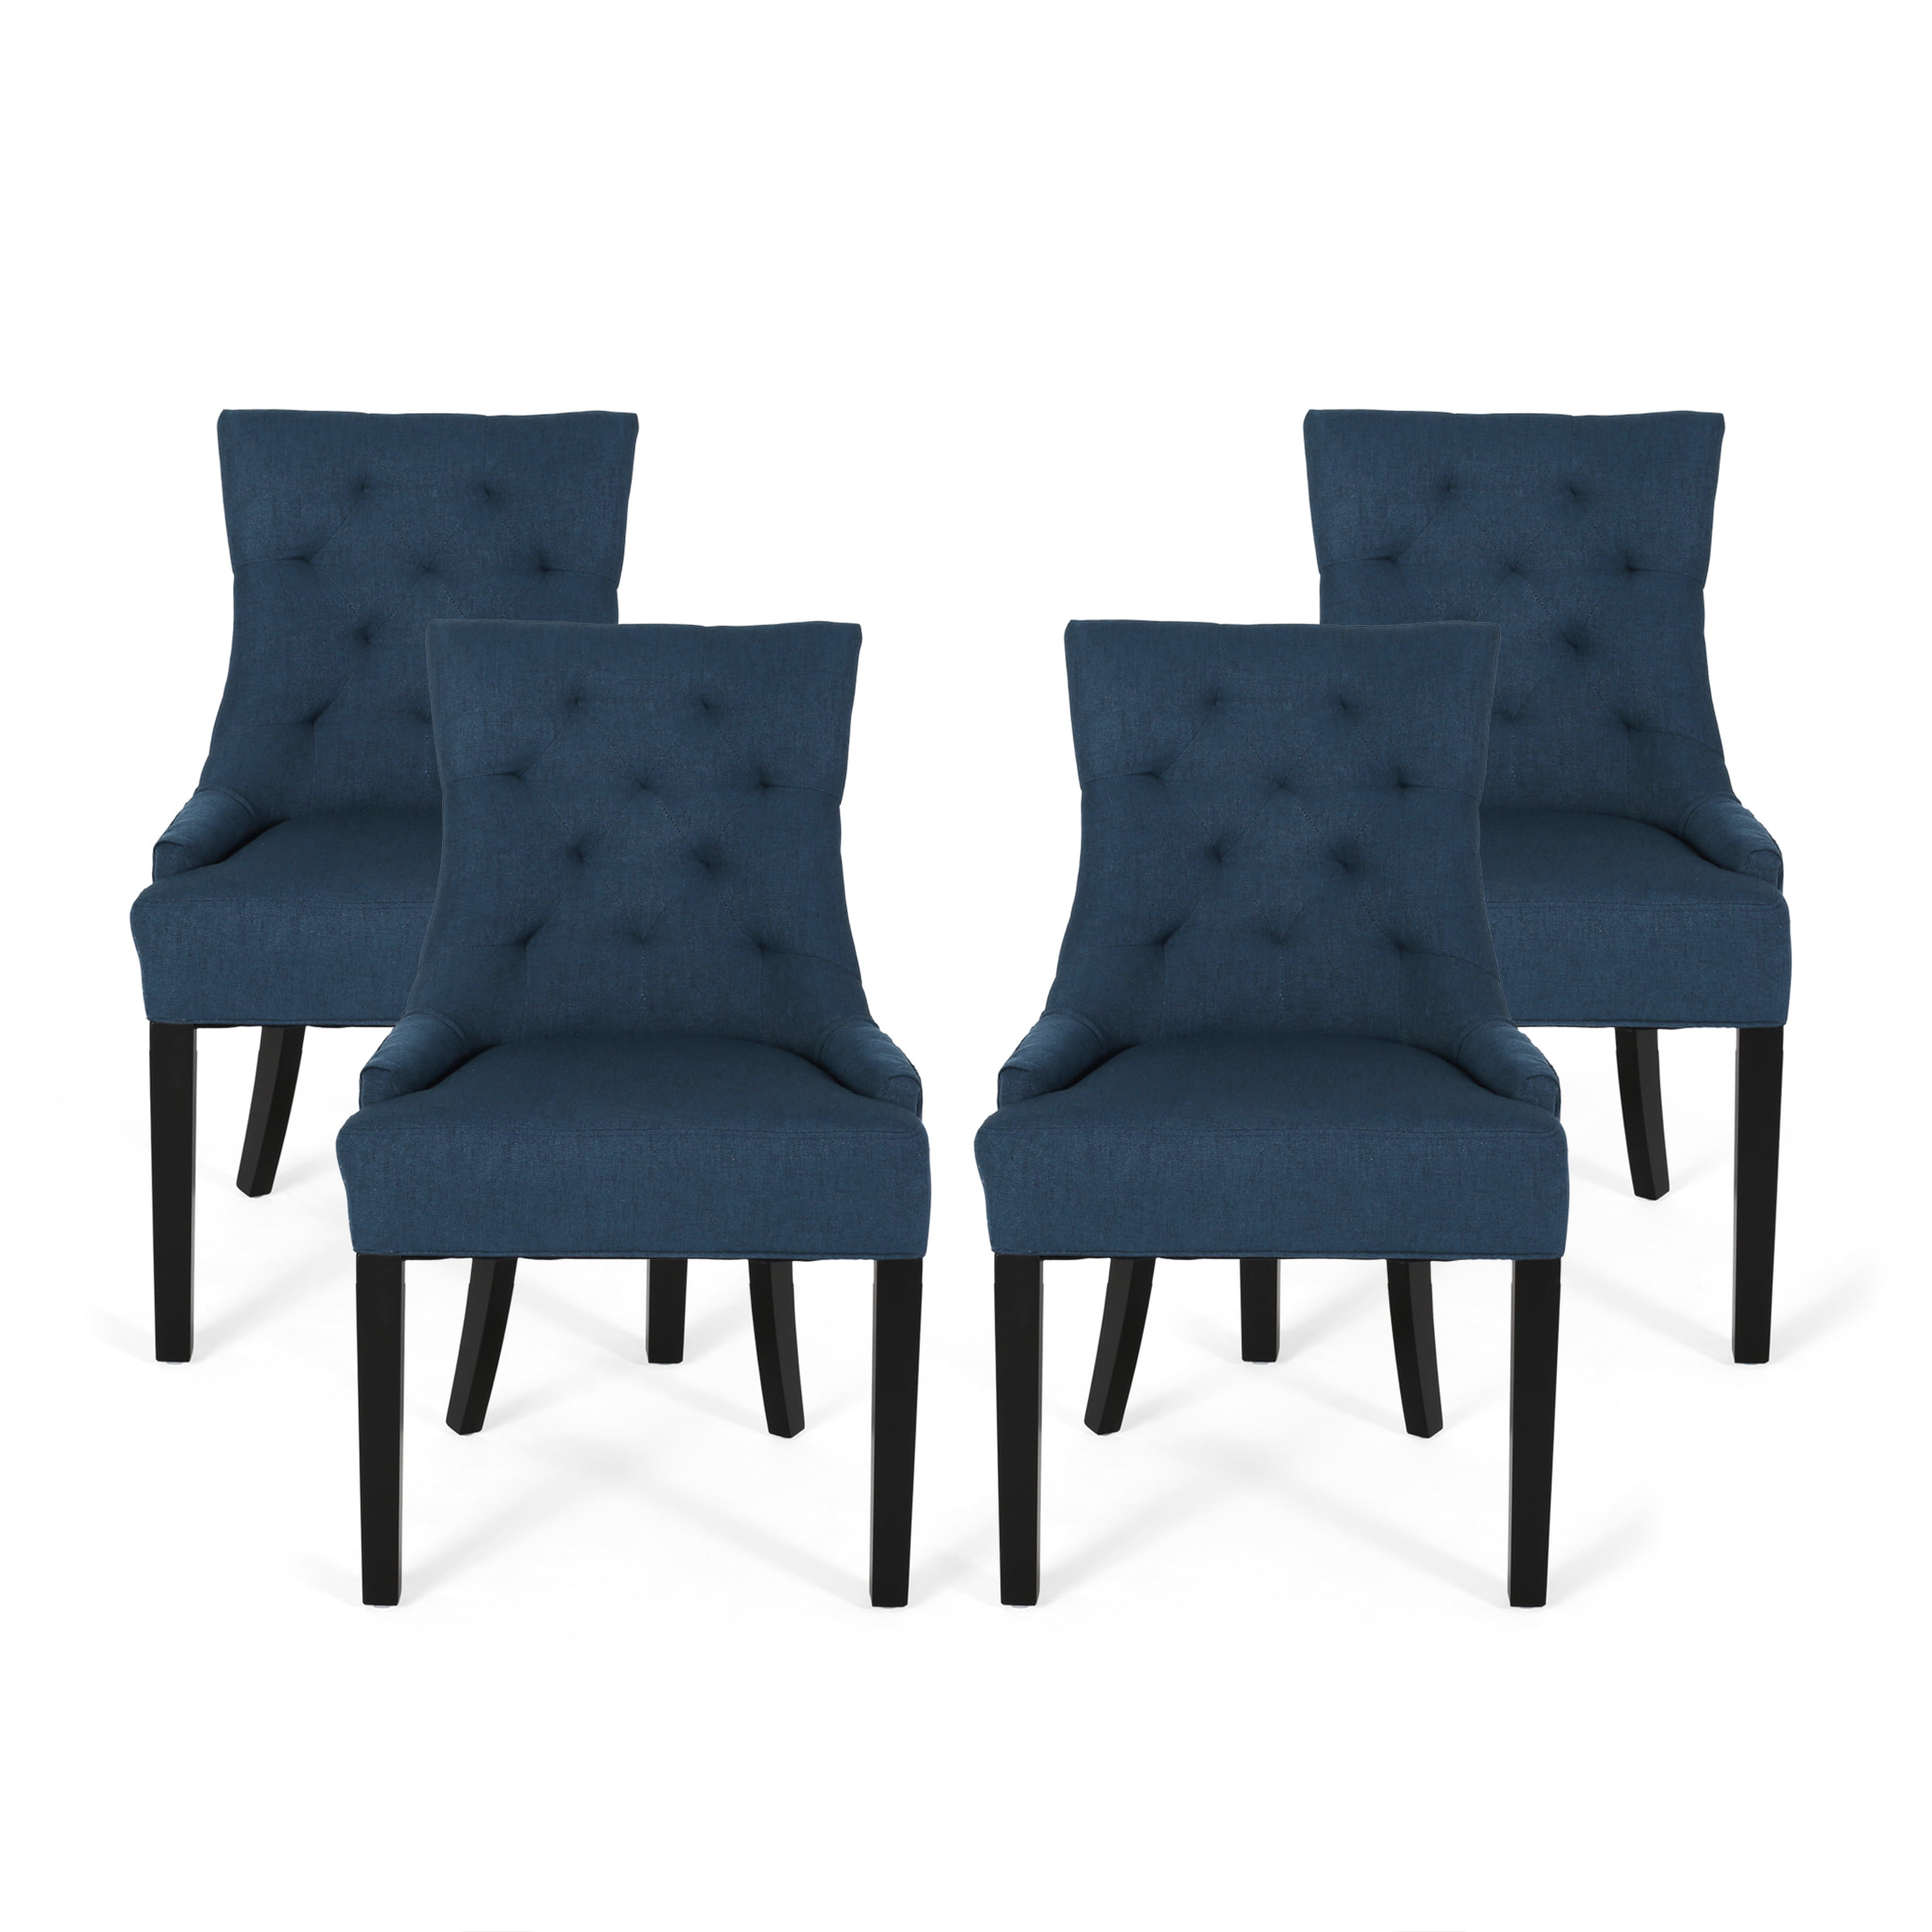 Noble House Tyler Contemporary Tufted Fabric Dining Chairs, Set of 4